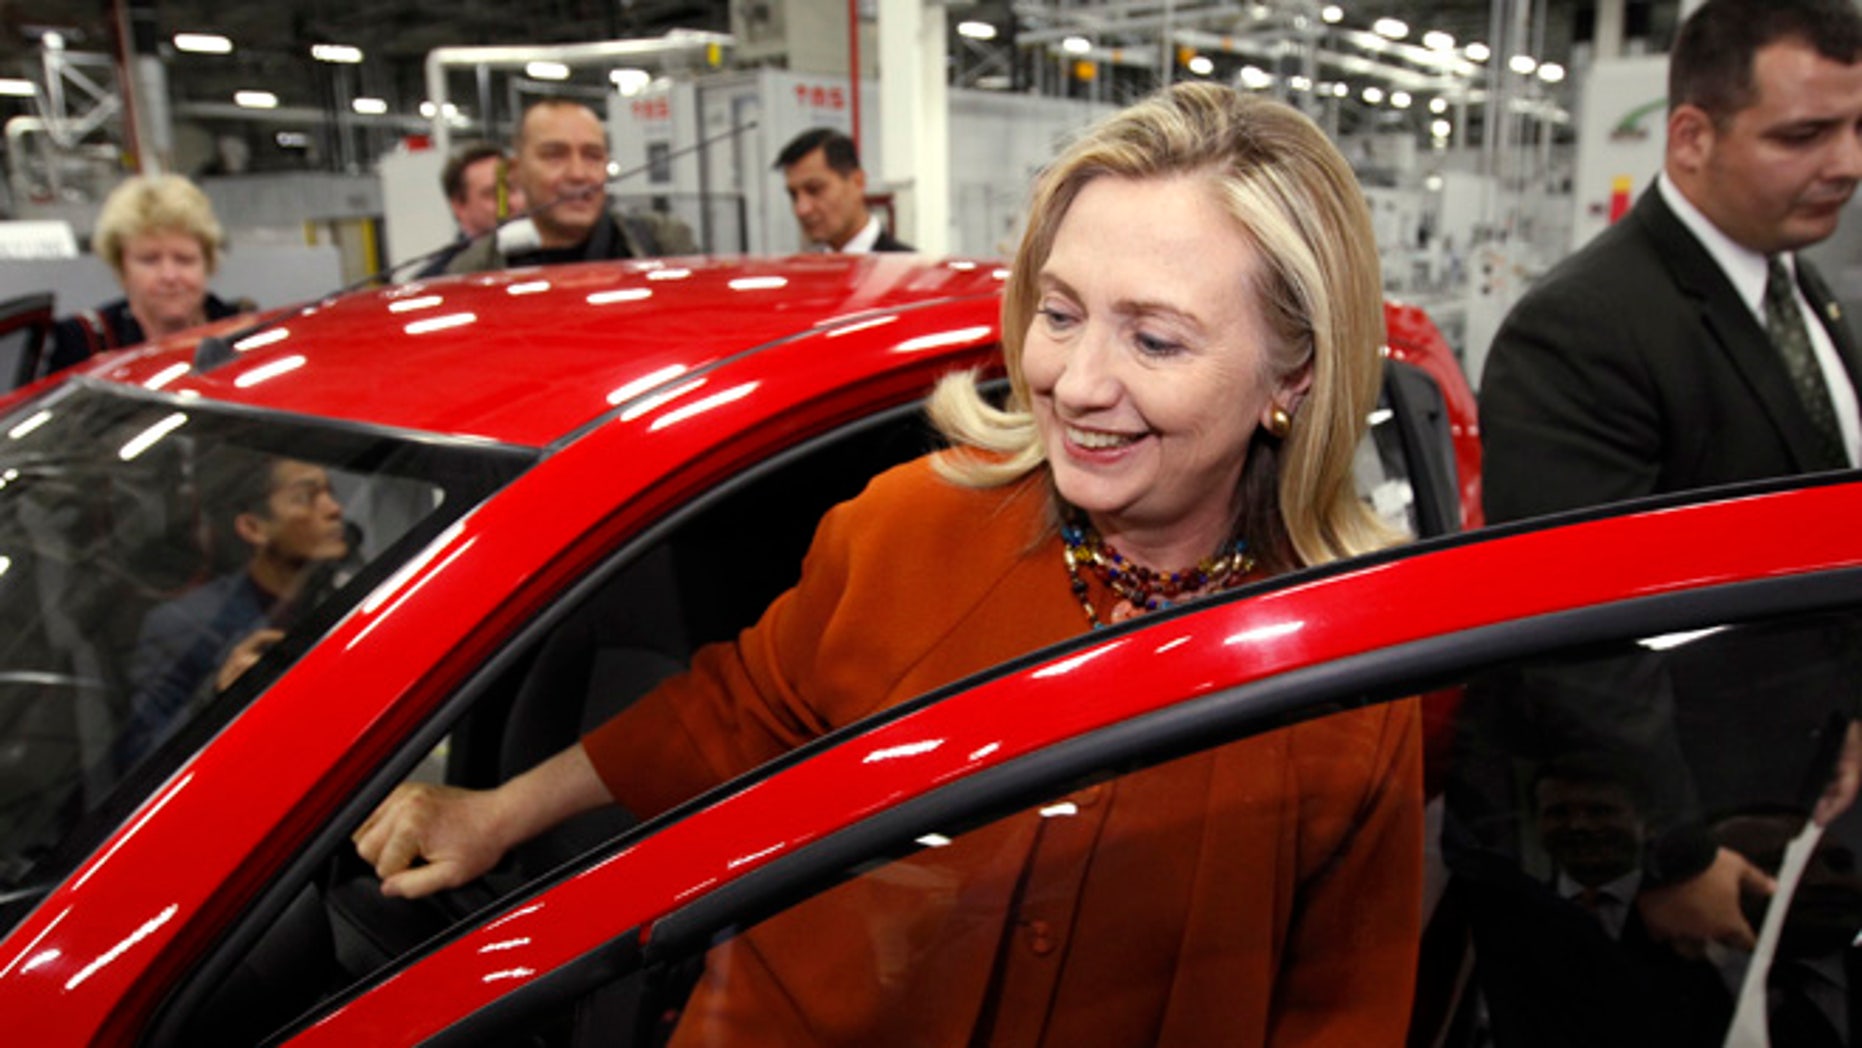 October 23, 2011: U.S. Secretary of State Hillary Clinton gets out of a GM "Spark" while touring the GM Powertrain plant in Tashkent, Uzbekistan.